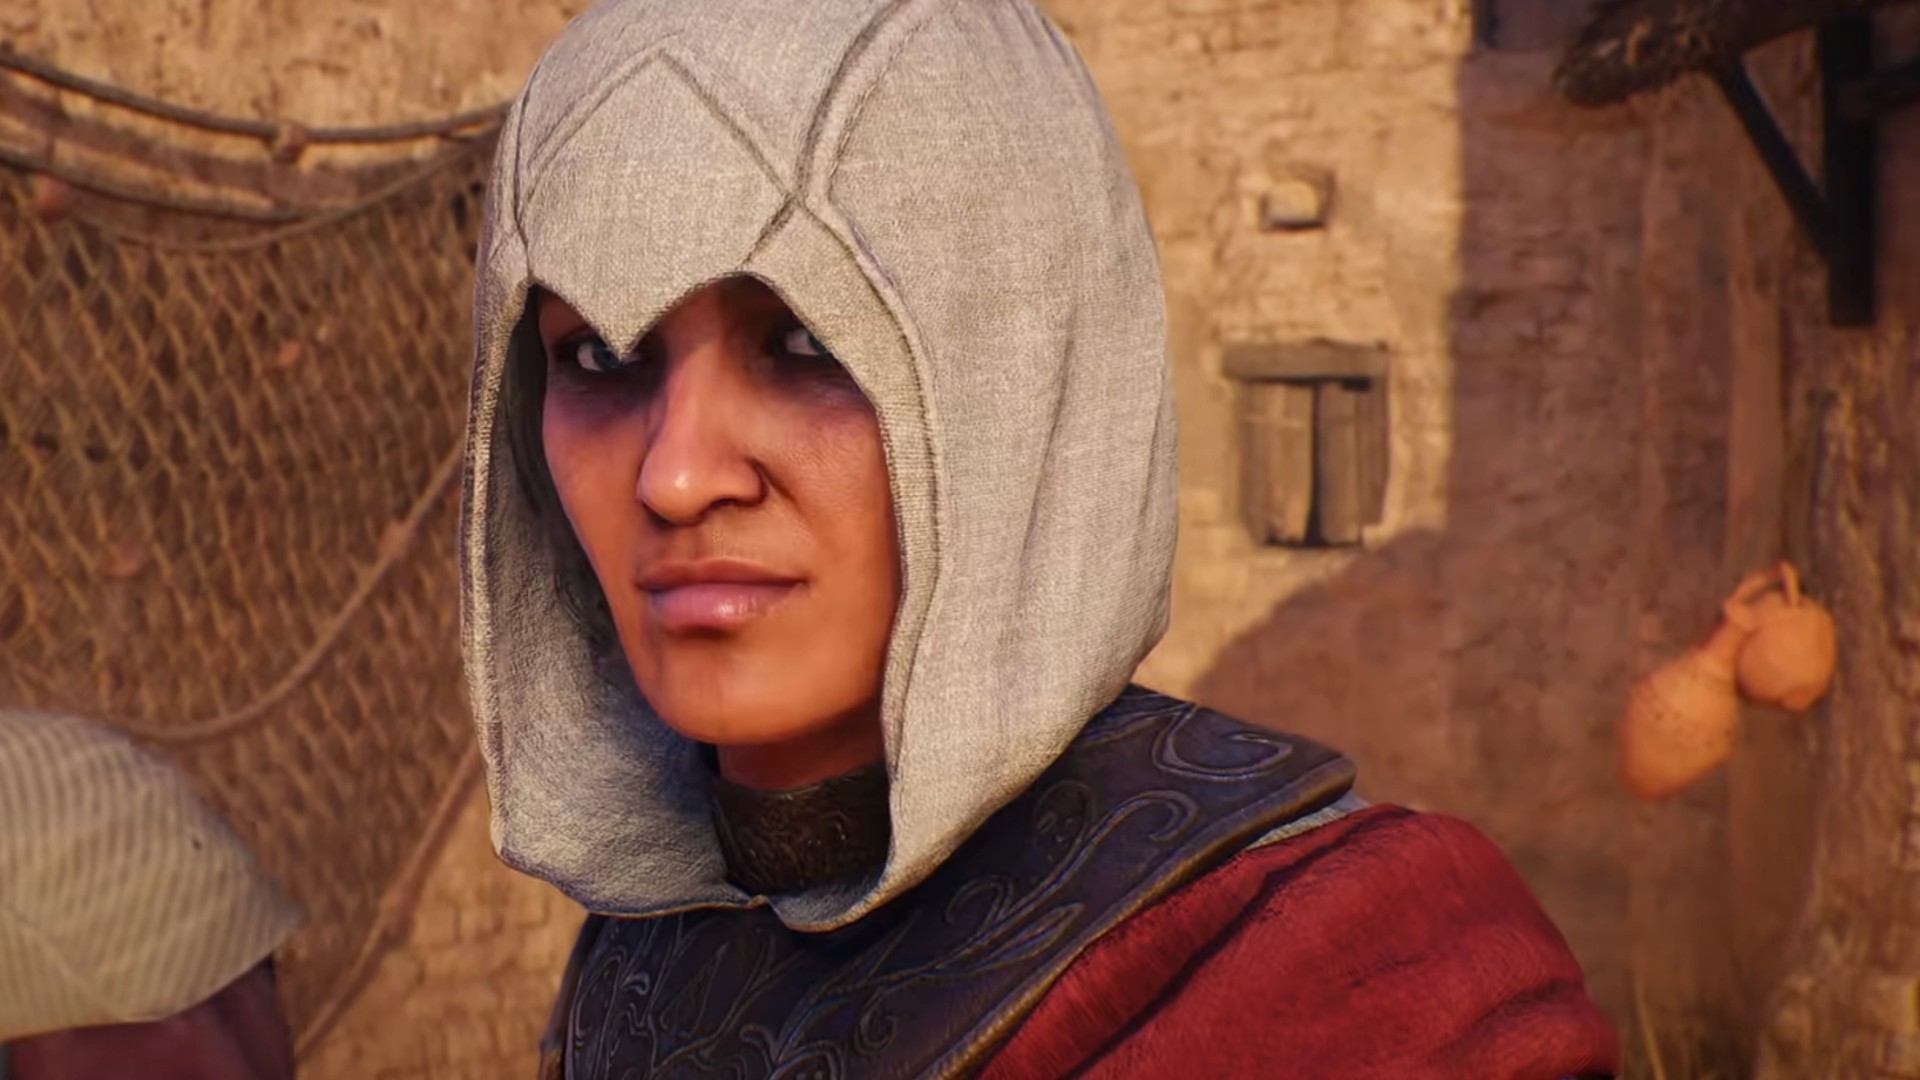 Assassin's Creed 3 - Characters and Voice Actors 